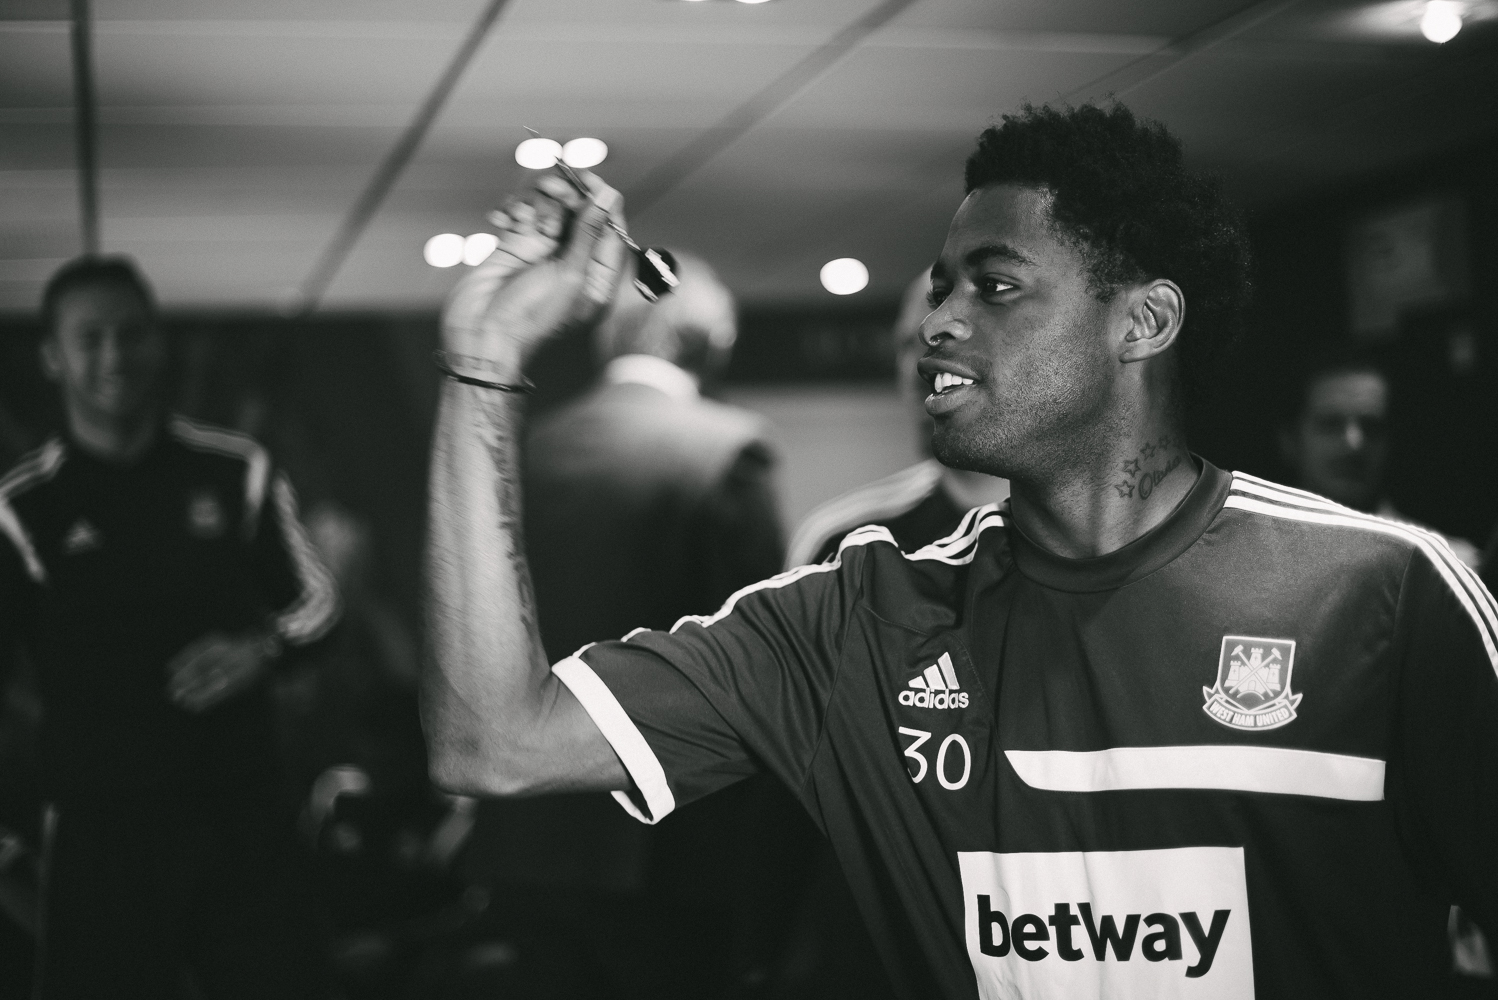 Betway_WestHam_Alex_Wallace_Photography_0127.jpg